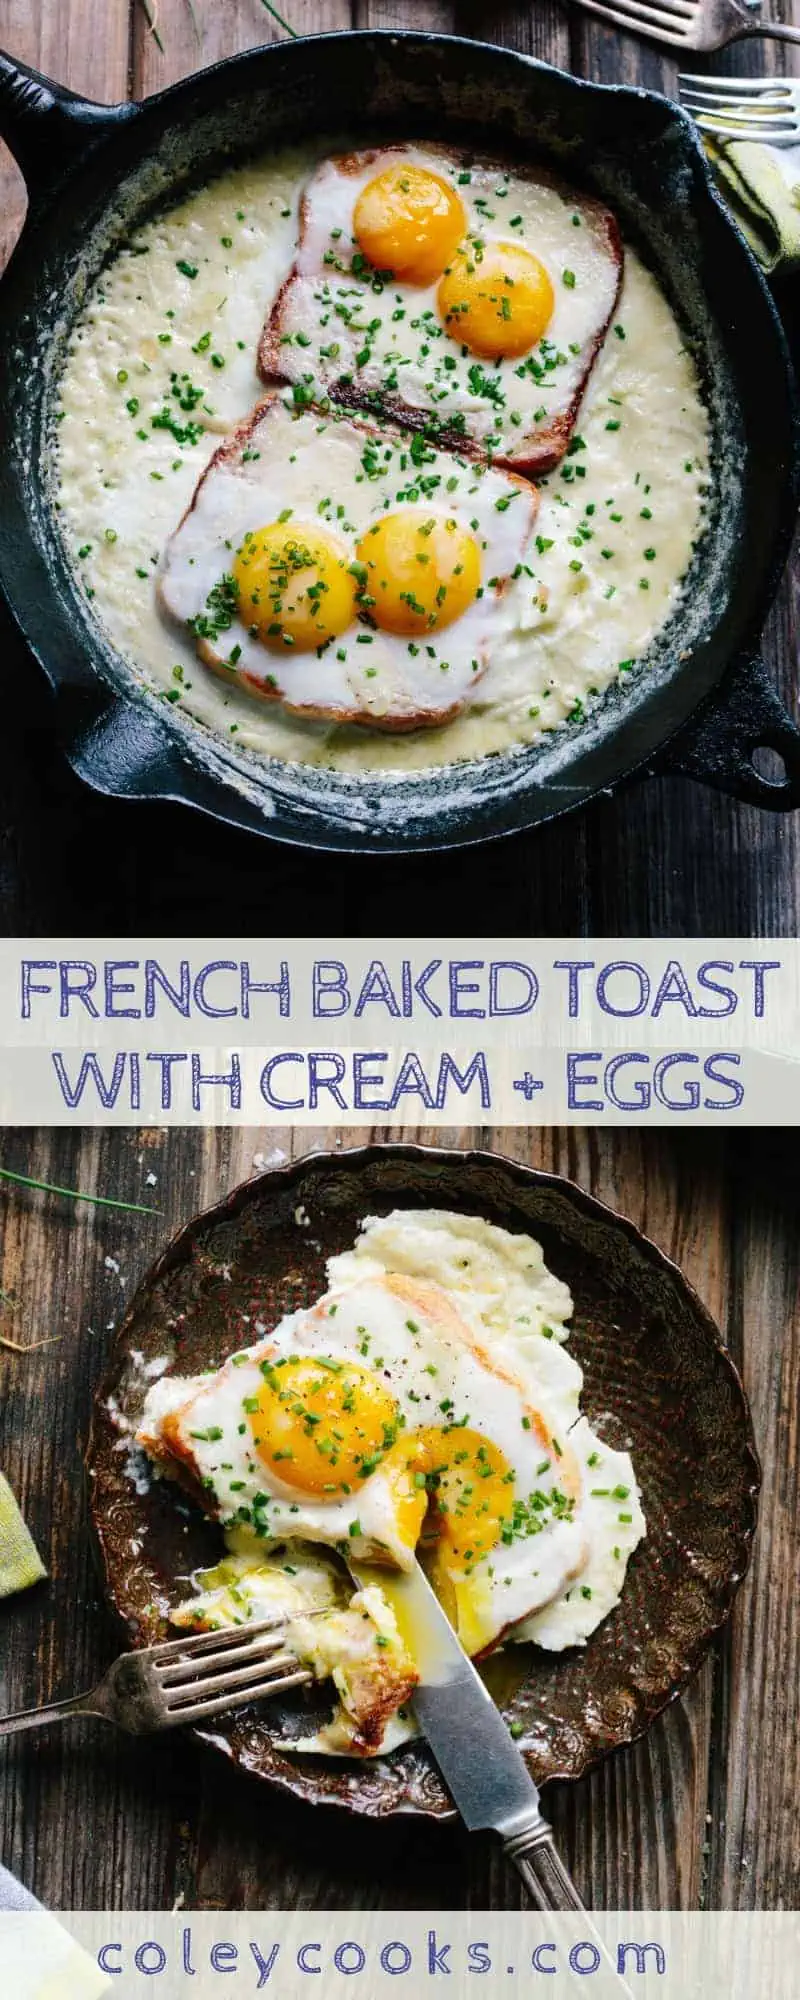 FRENCH BAKED TOAST WITH CREAM + EGGS | Easy + Impressive French Breakfast. Rich, decadent, satisfying buttery toast baked with cream and topped with eggs. amazing! #french #toast #breakfast #brunch #eggs #recipe | ColeyCooks.com